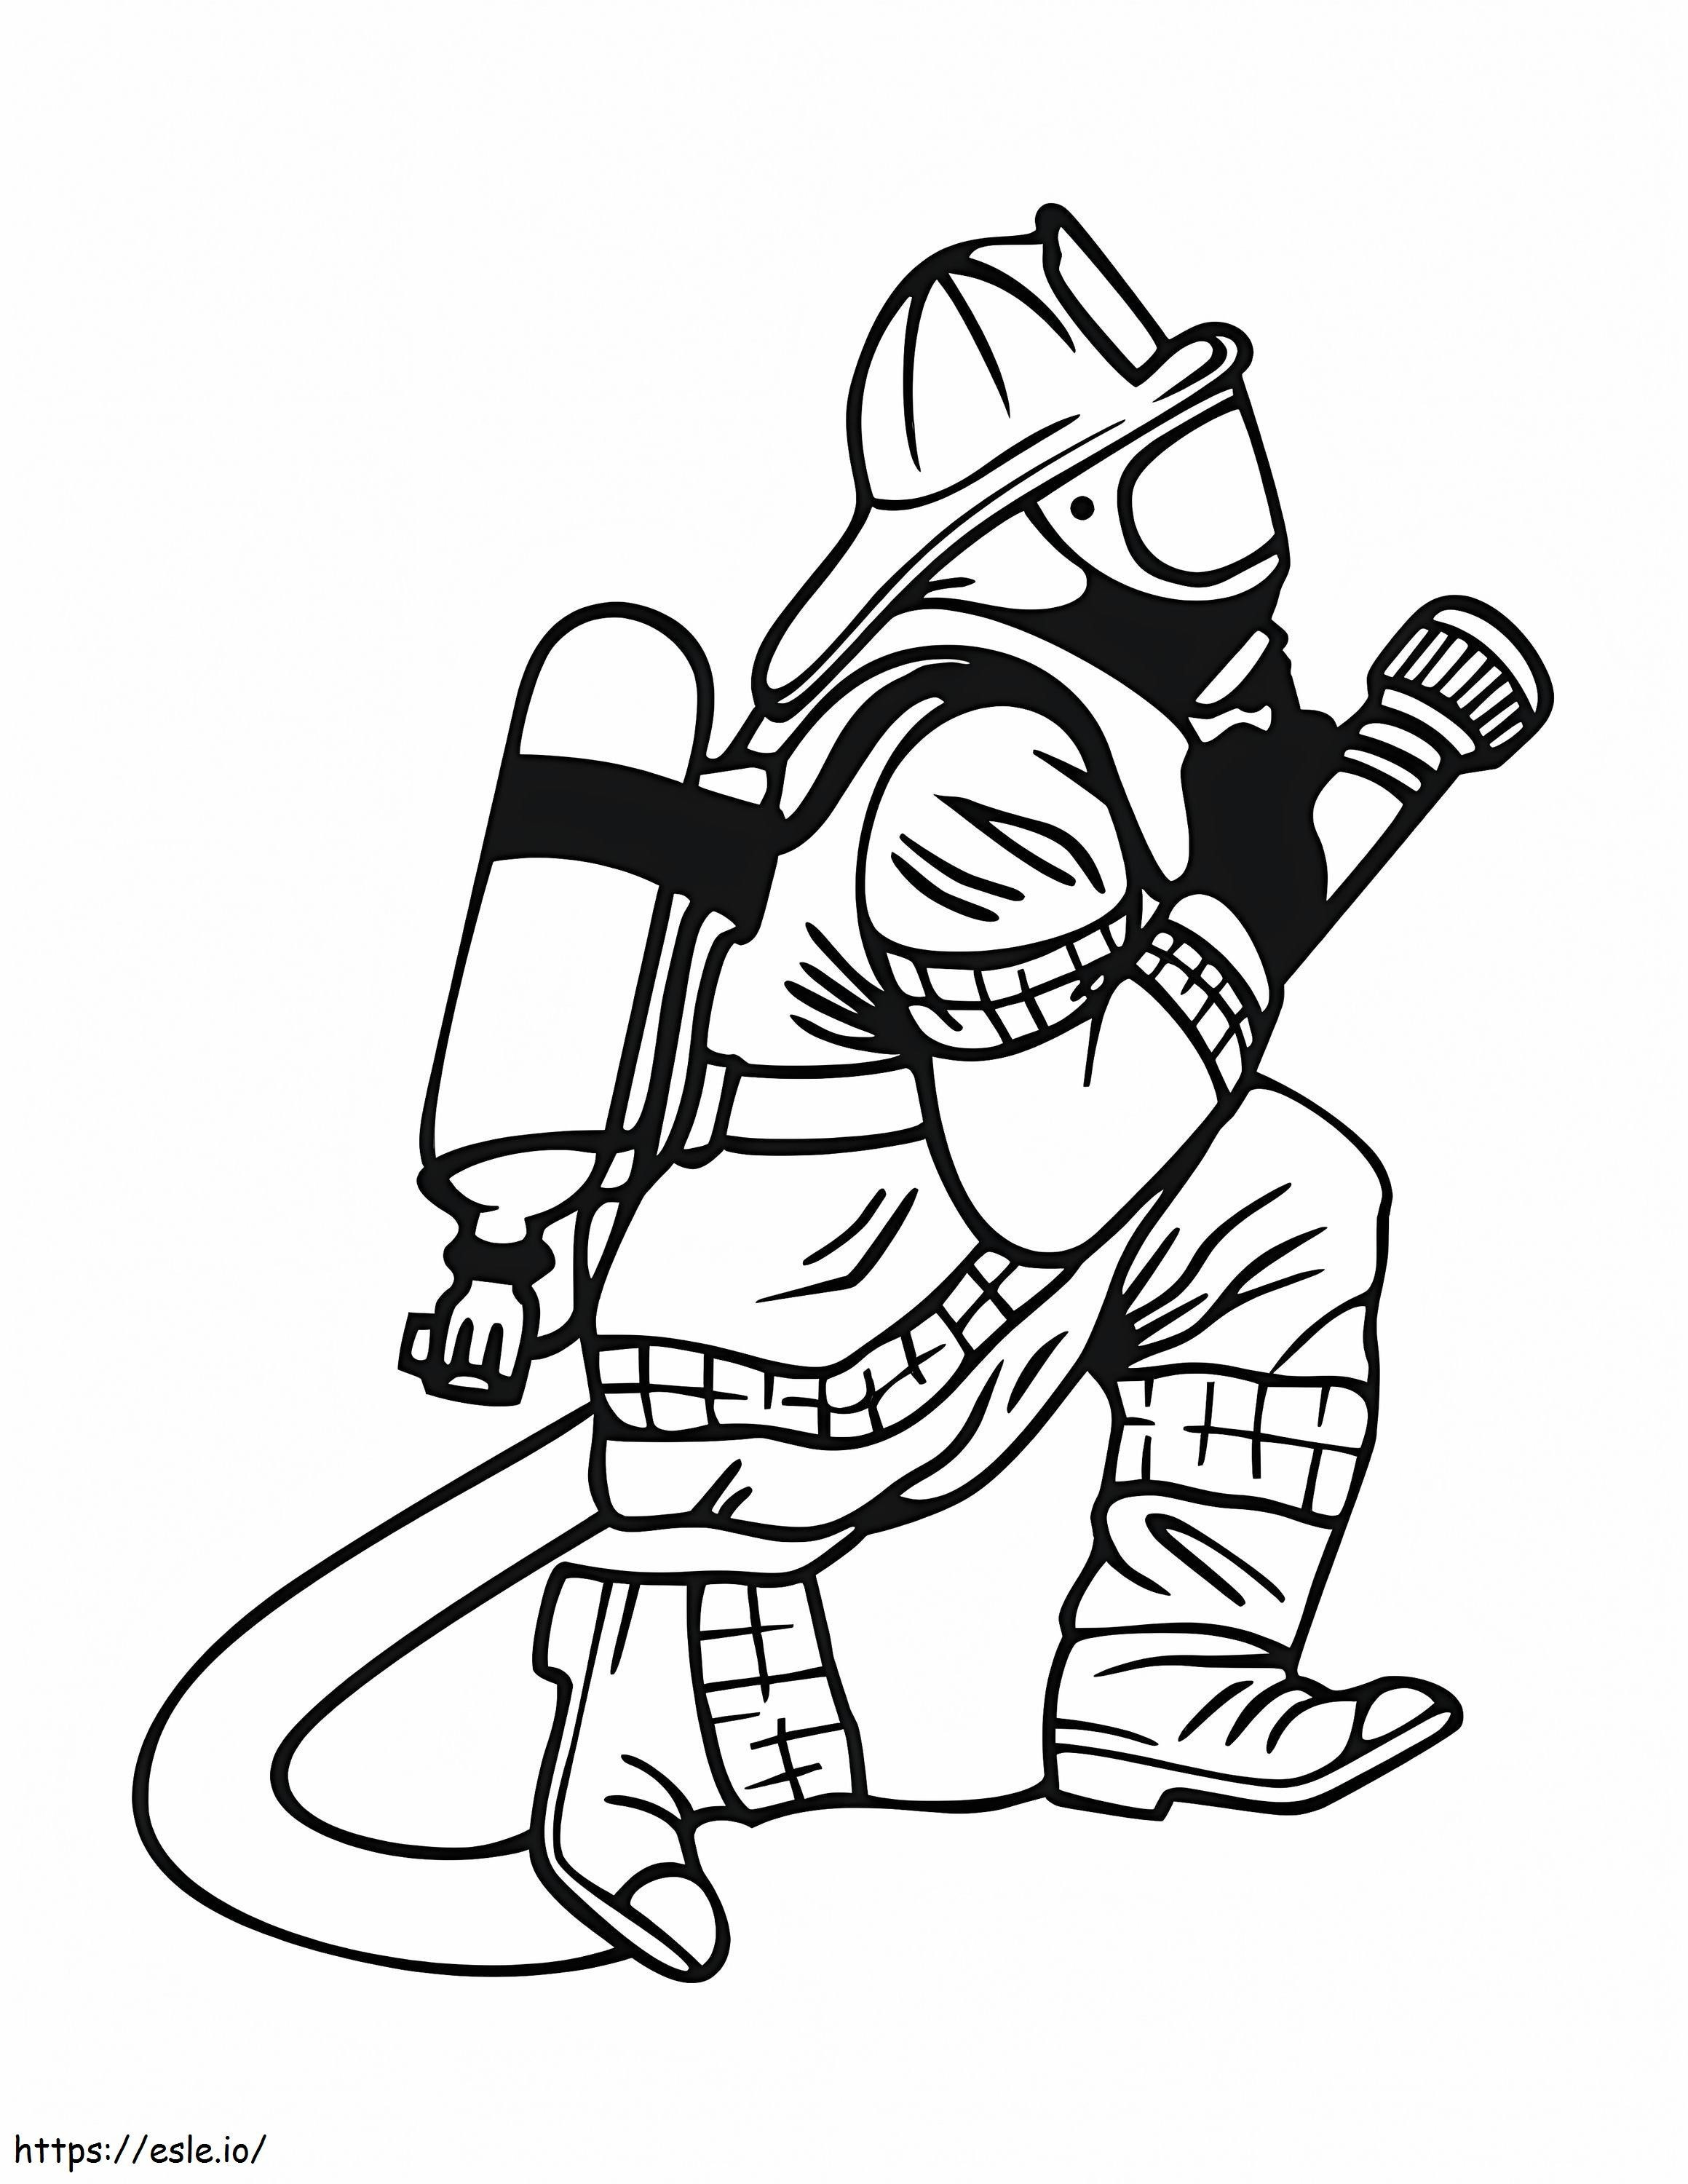 Firefighter 2 coloring page